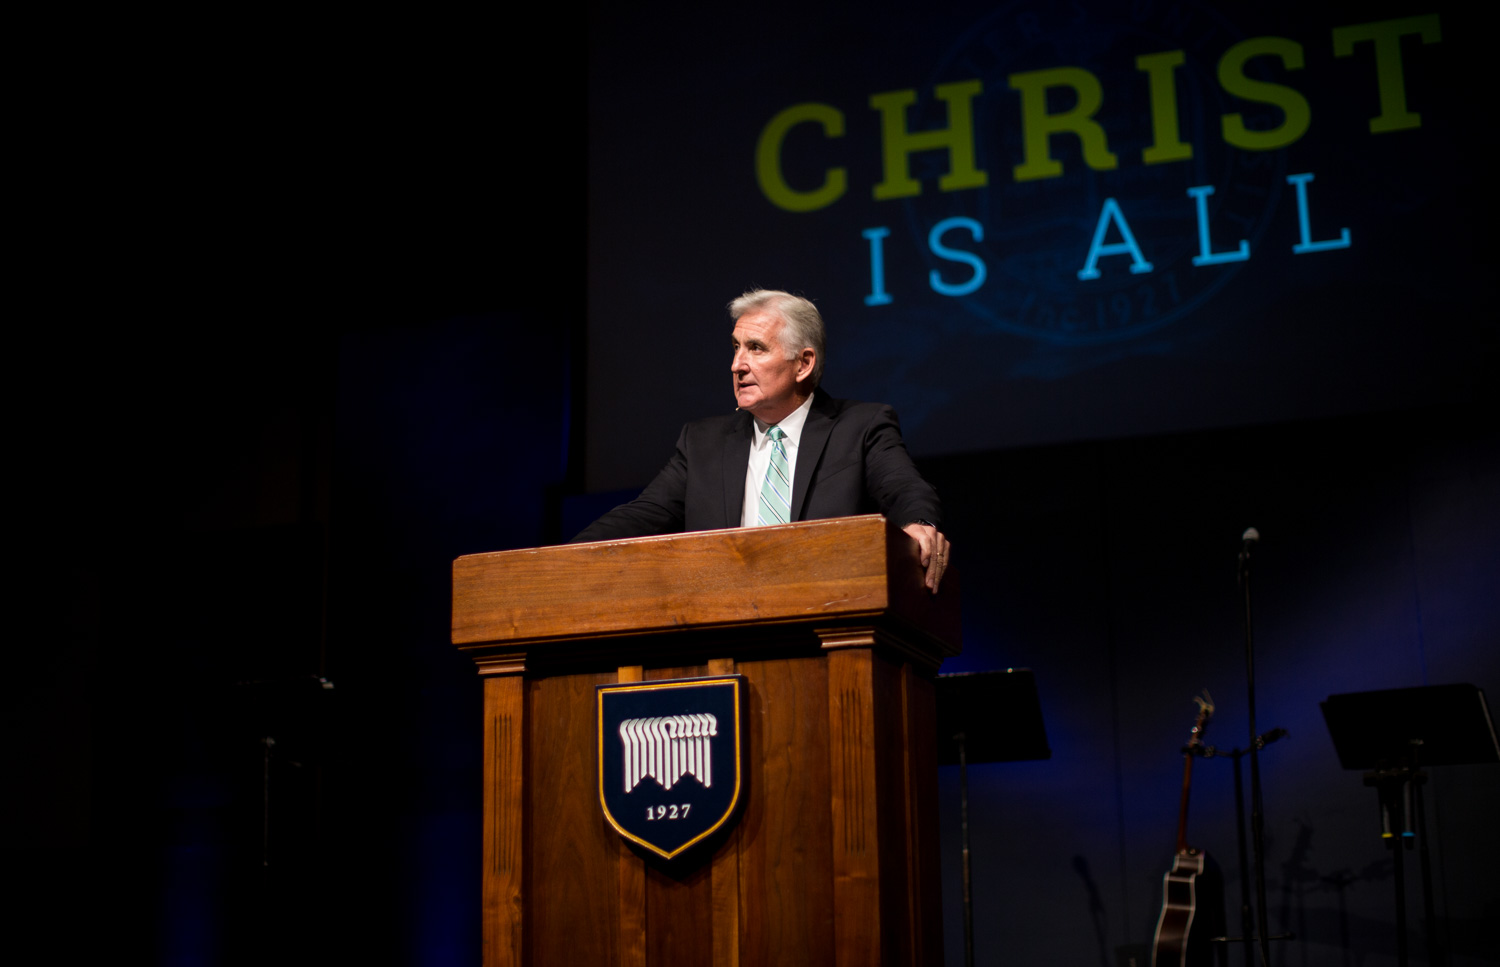 Dr. Harry Walls Enters New Chapter, Leaves Faithful Legacy at TMU